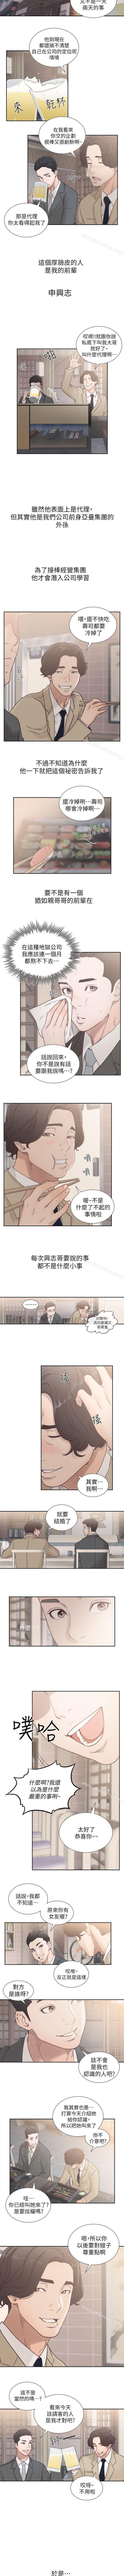 Penetration 前女友 1-51 Tight - Page 6